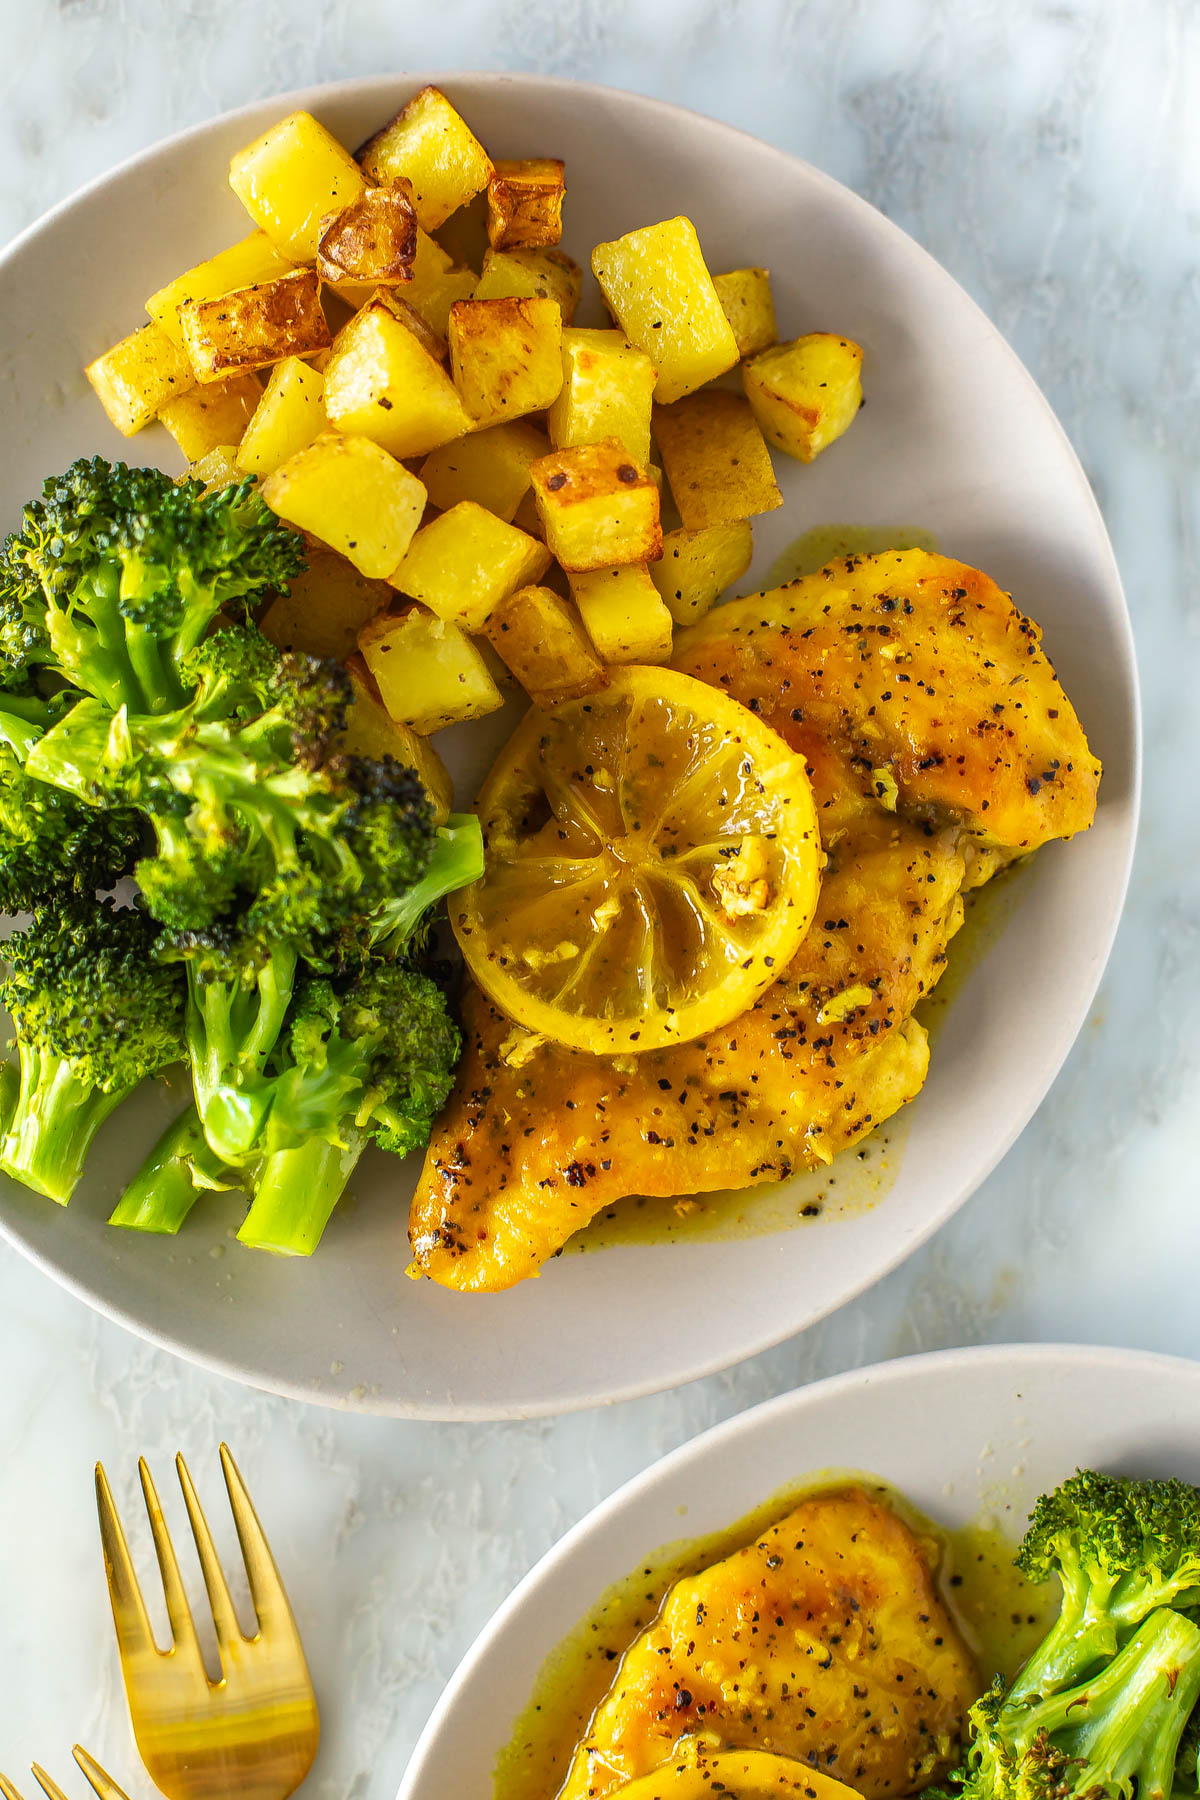 A close-up of a plate with lemon pepper chicken with a side of roasted potatoes and roasted broccoli.